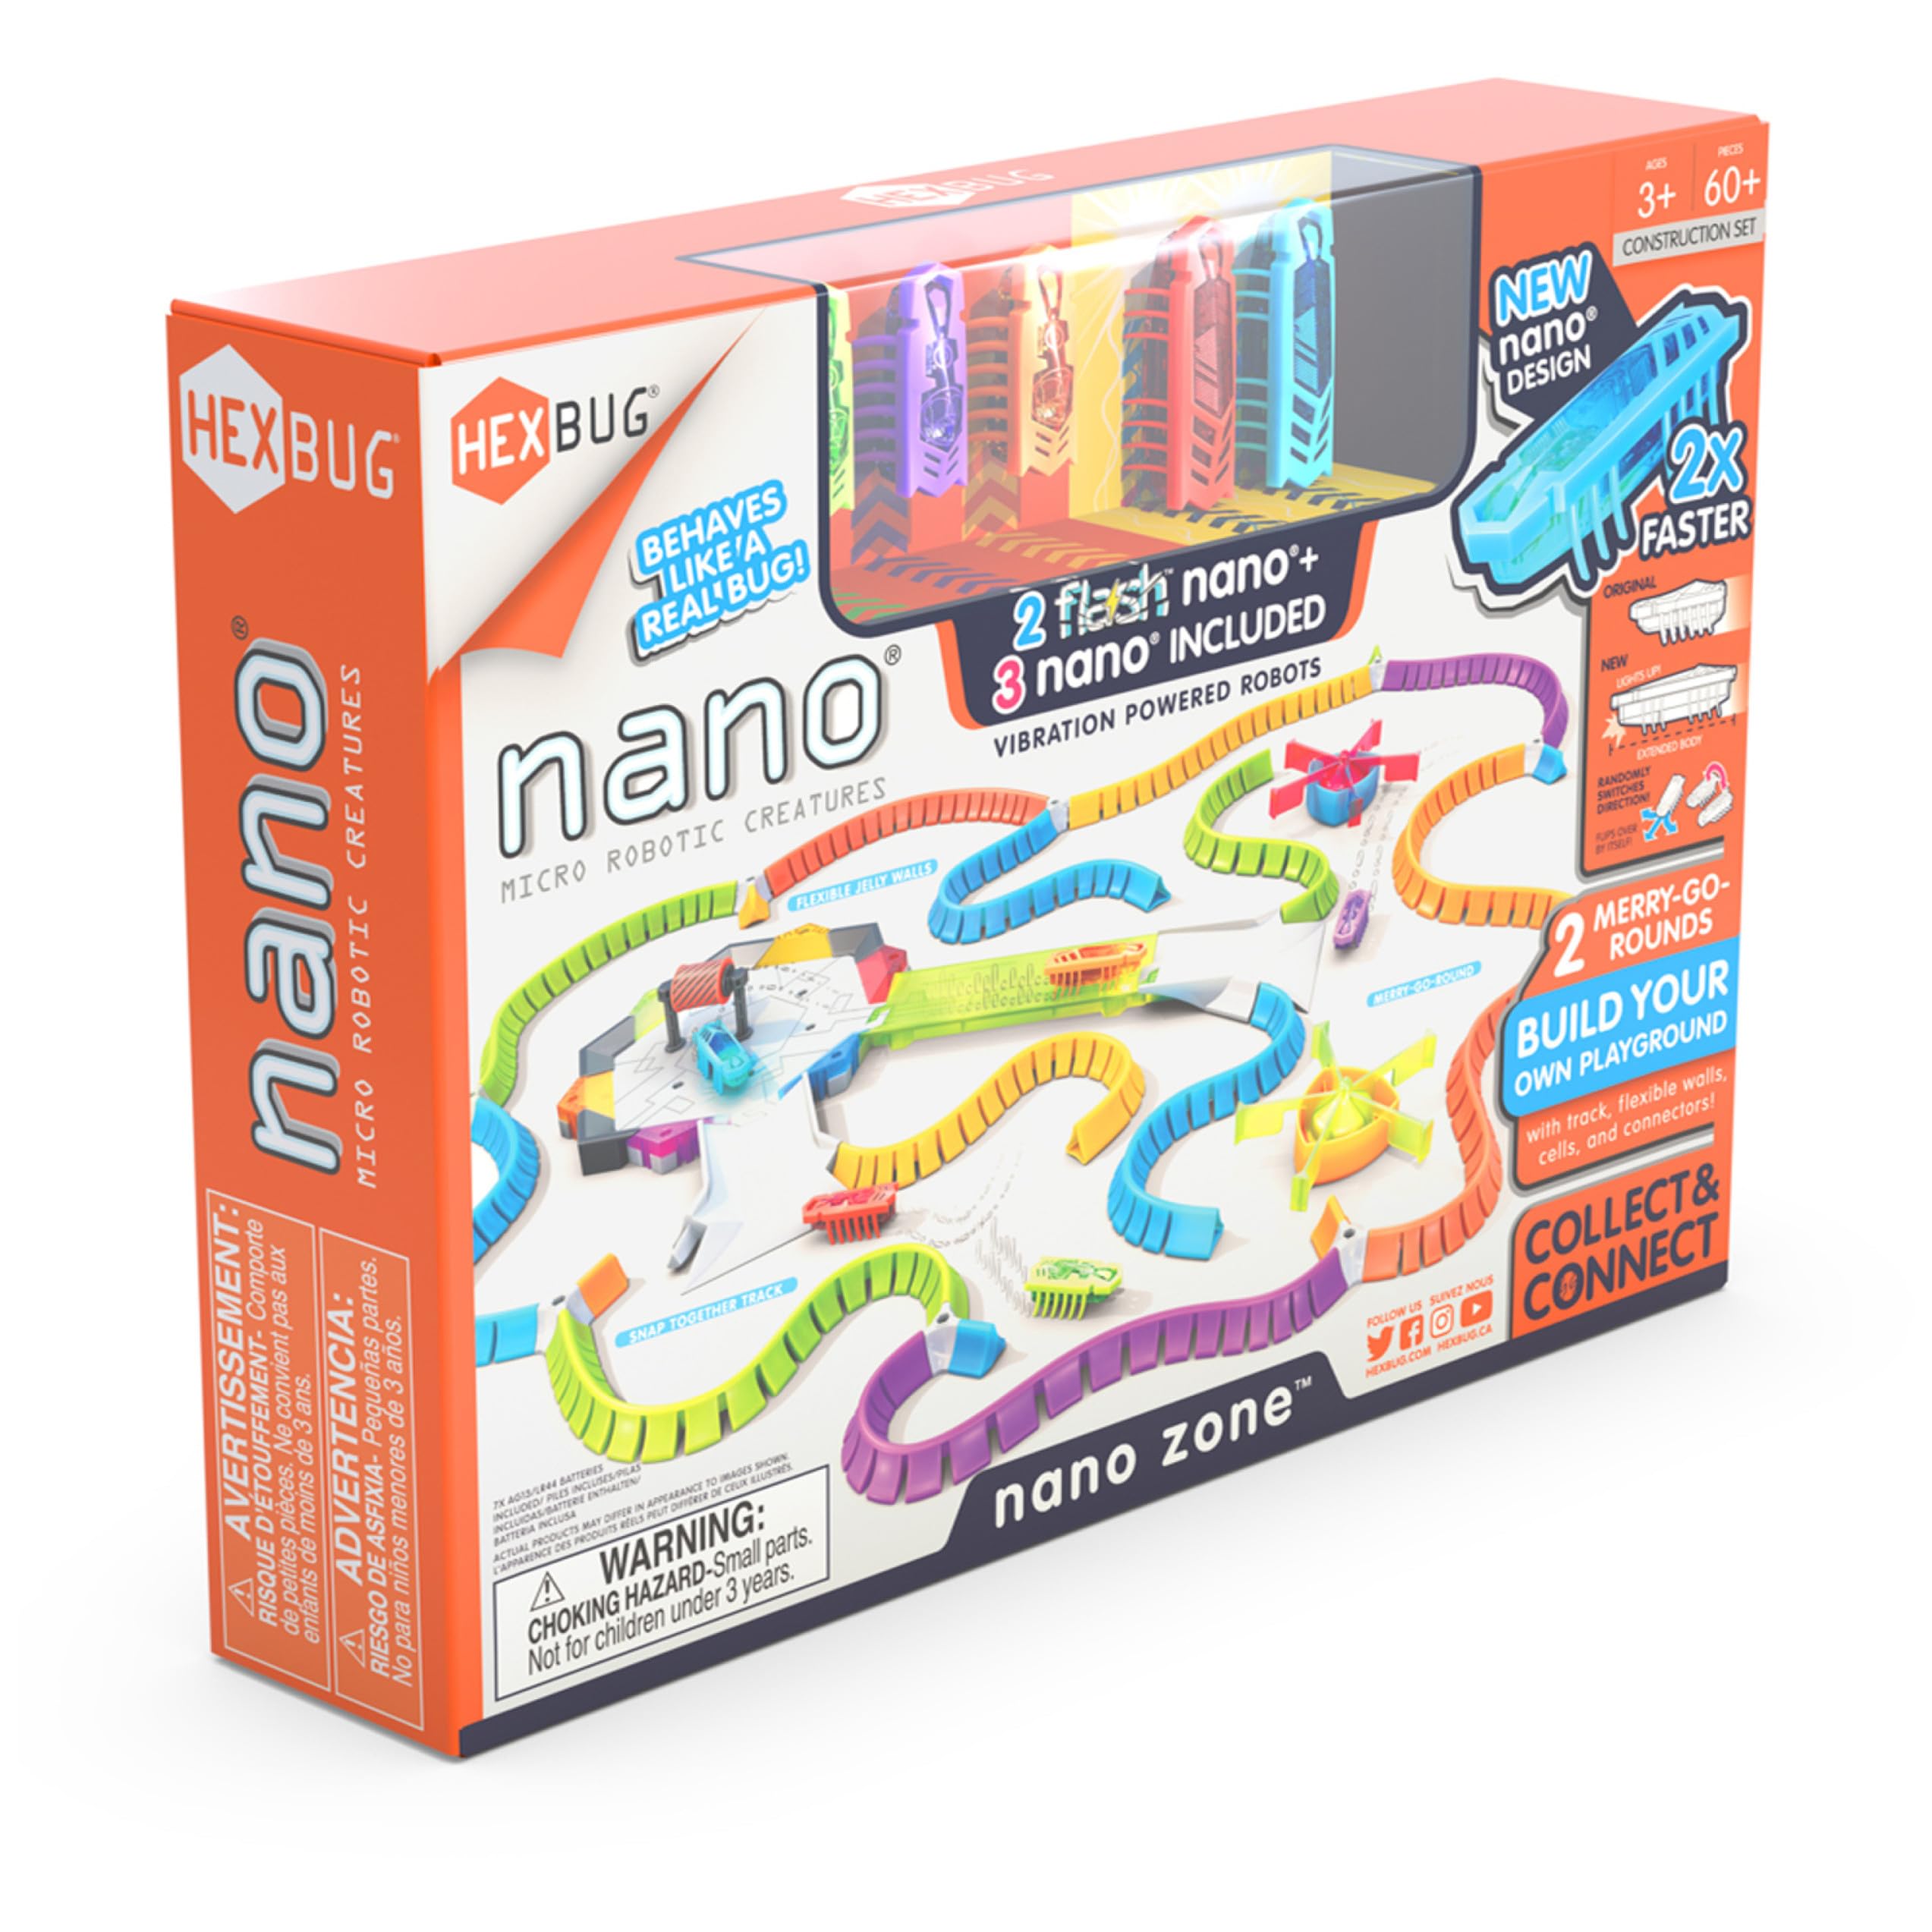 HEXBUG Nano Zone, Sensory Toys for Kids & Cats with Over 60 Pieces & 5 Nano Bugs, STEM Kits & Mini Robot Toy for Kids Ages 3 & Up, Batteries Included